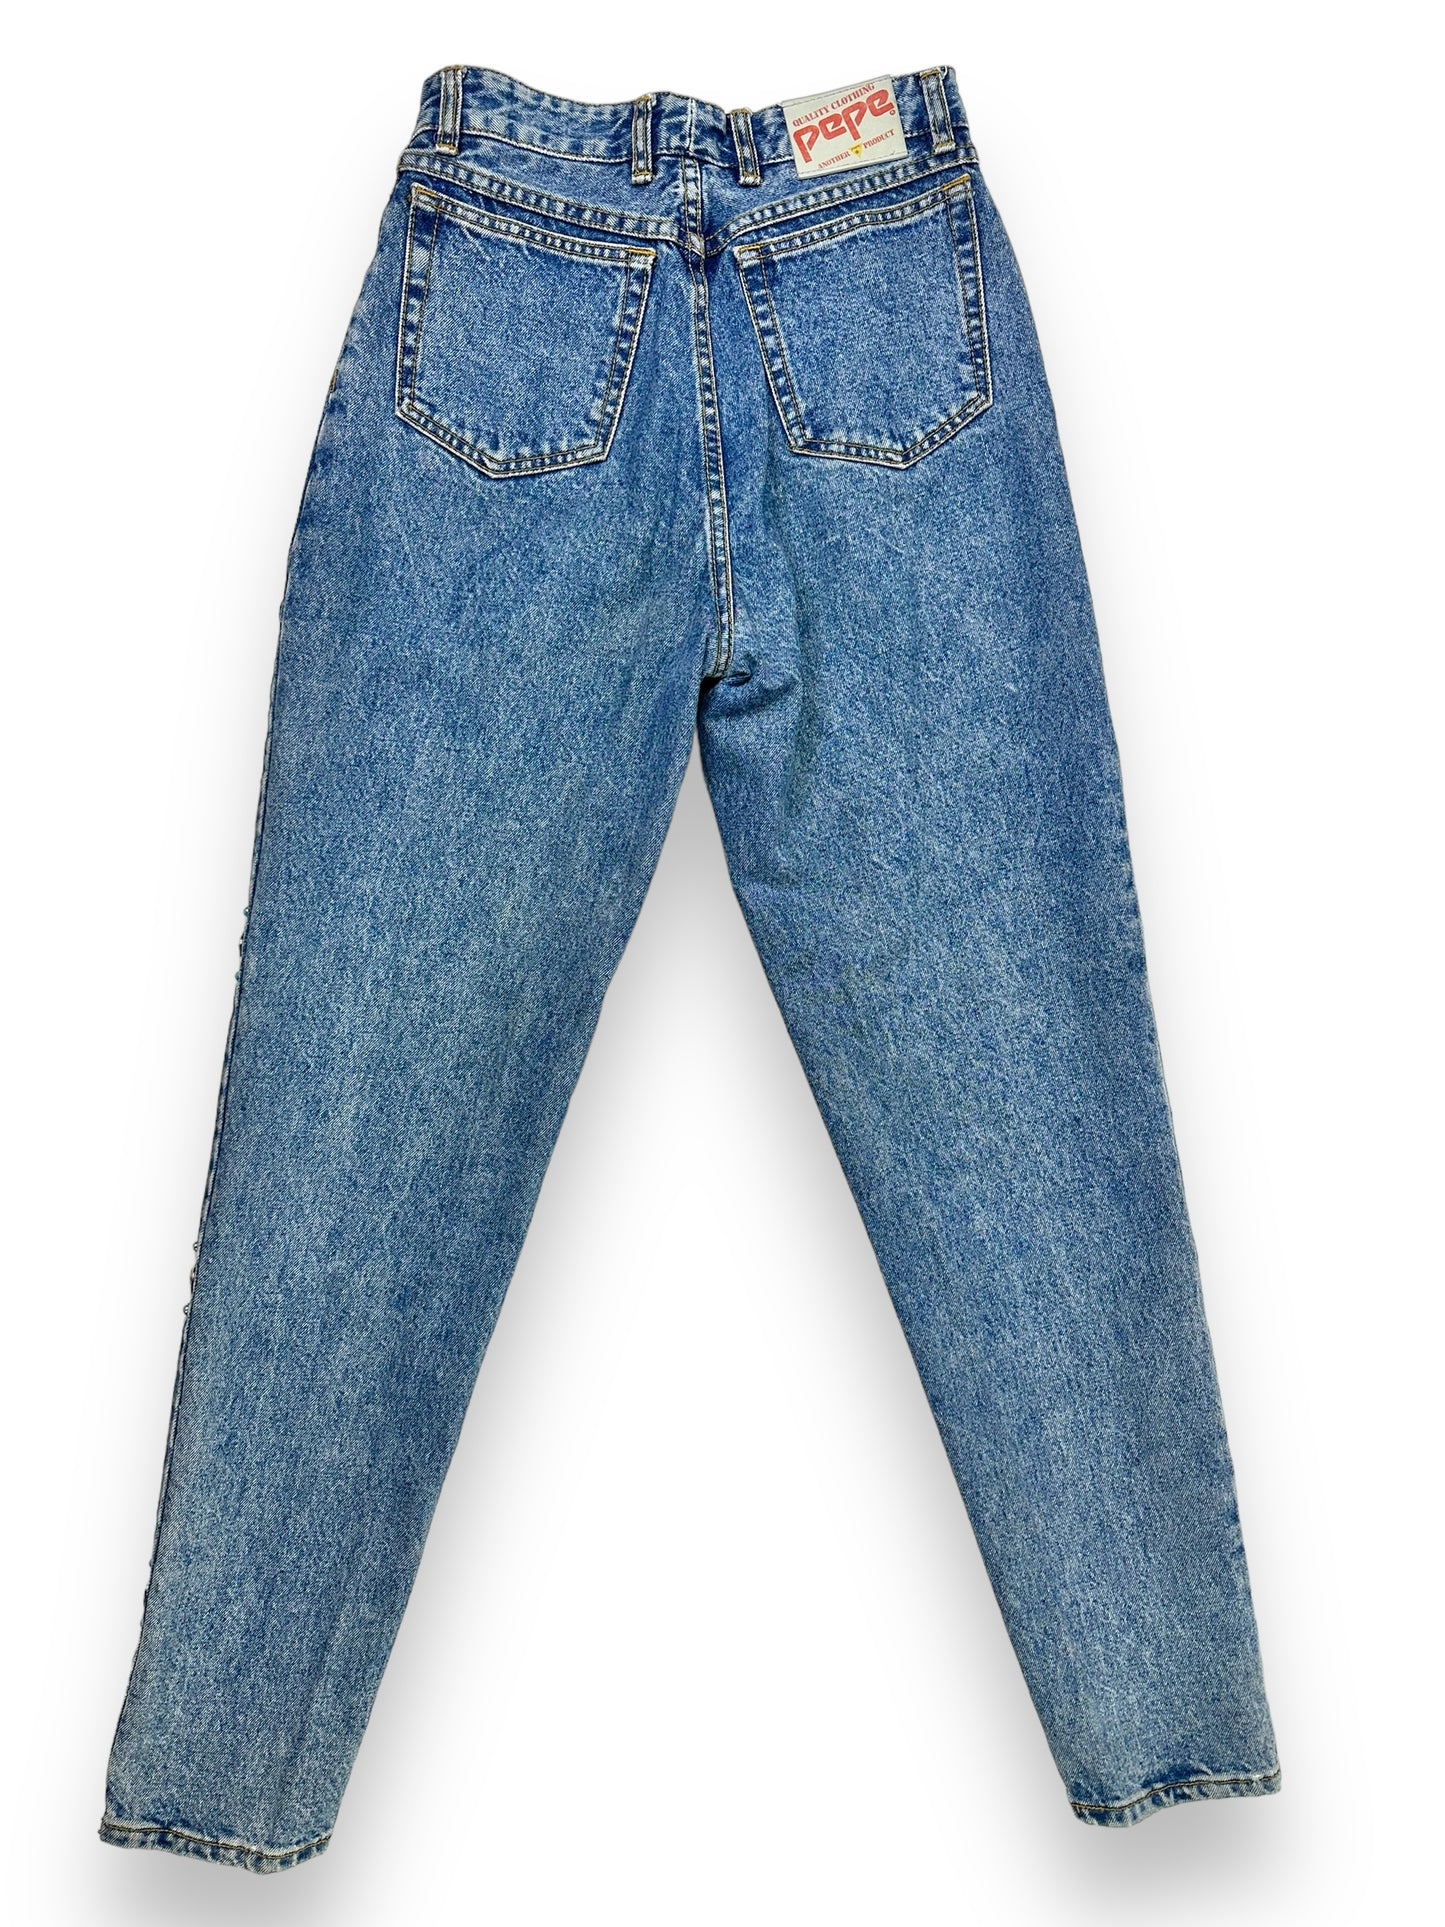 1980s “Pepe” Coin and Gem  “Betty” Jeans